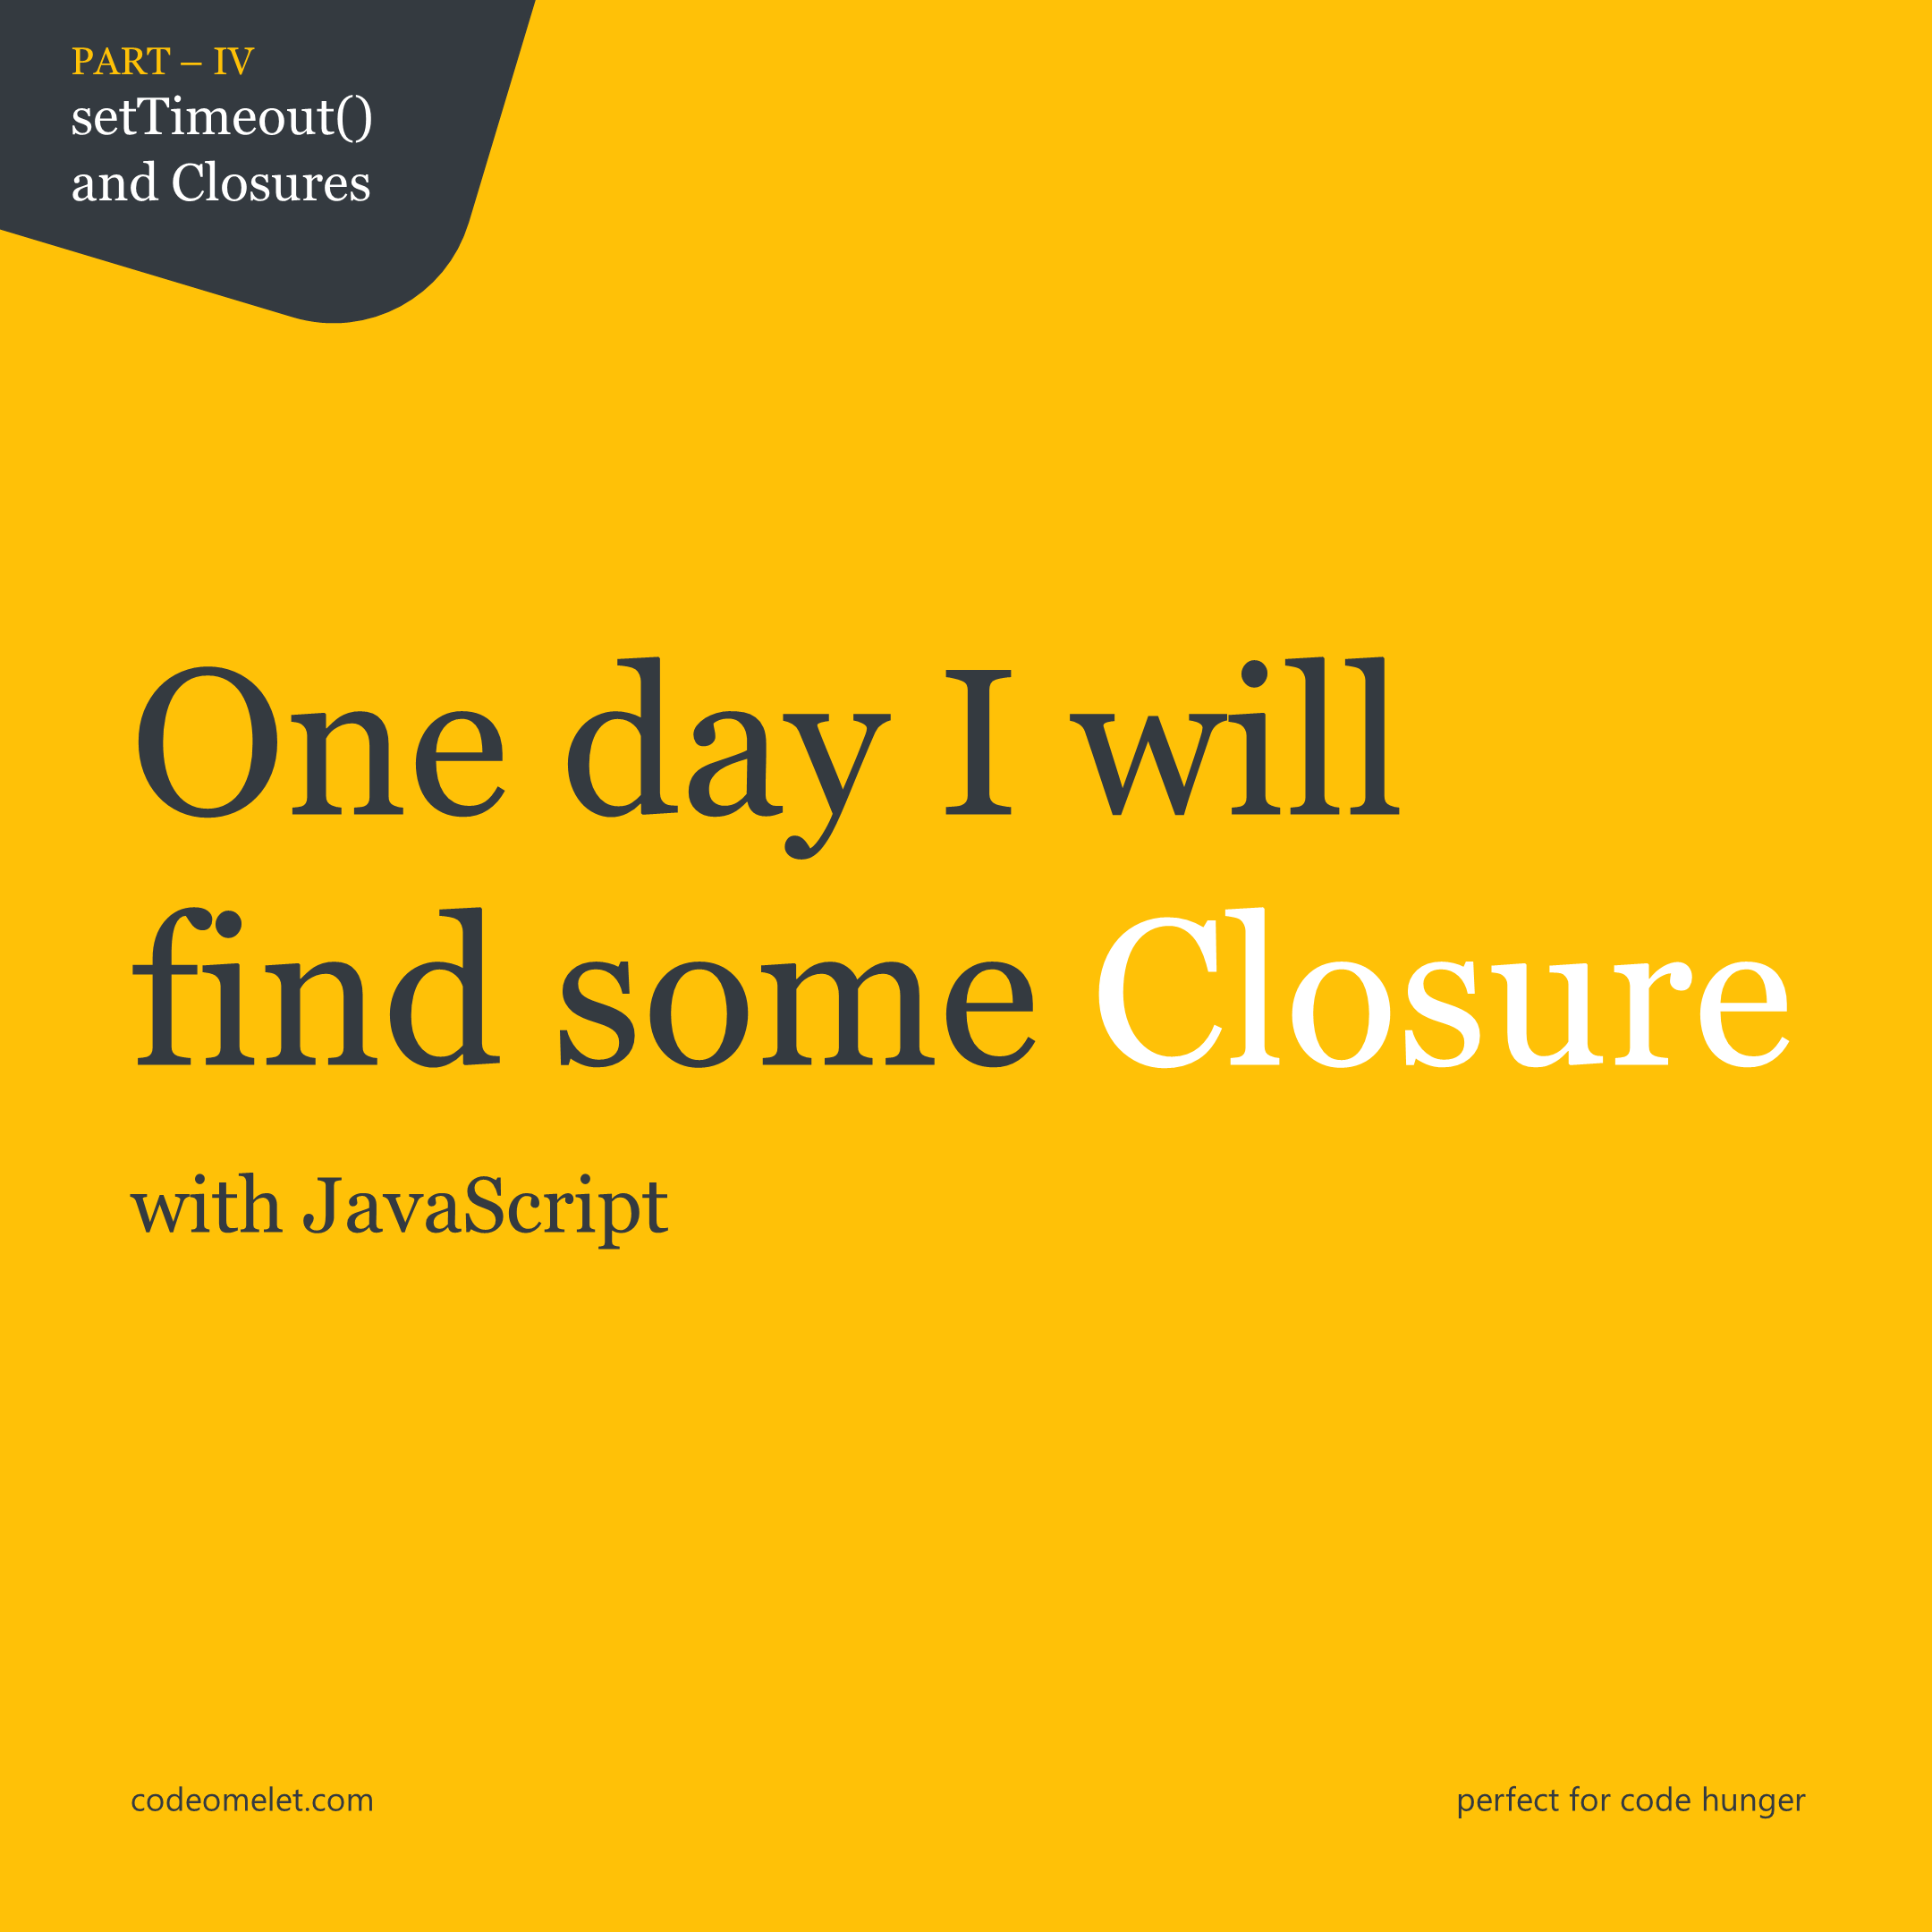 One day I will find some Closure - setTimeout() & Closures